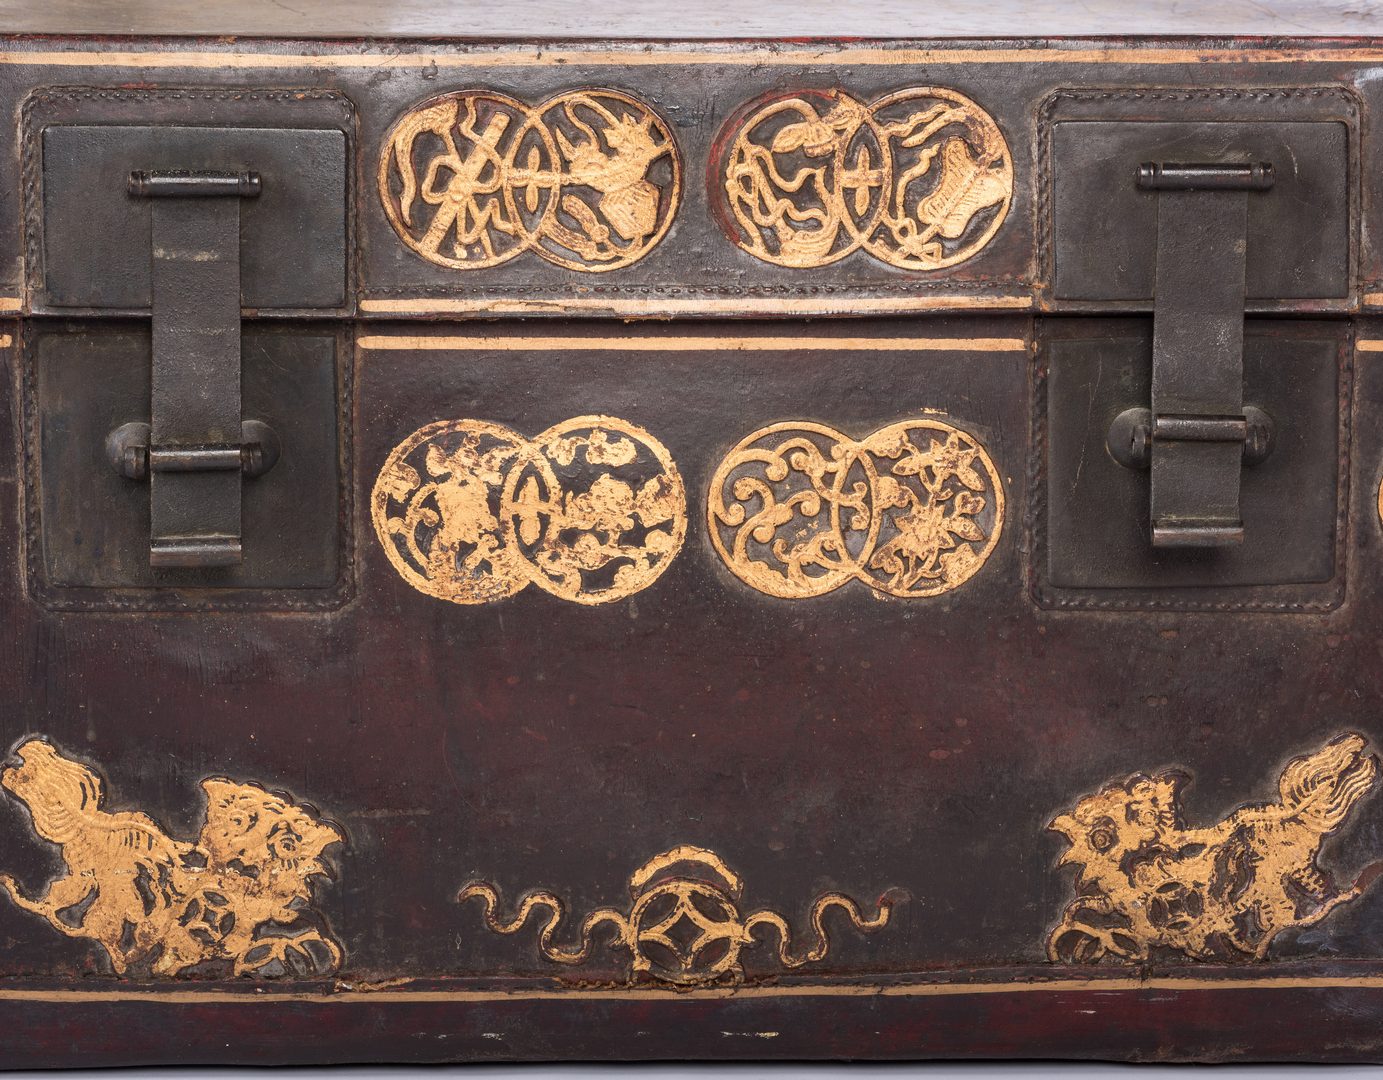 Lot 771: 2 Chinese Trunks, Leather & Wood